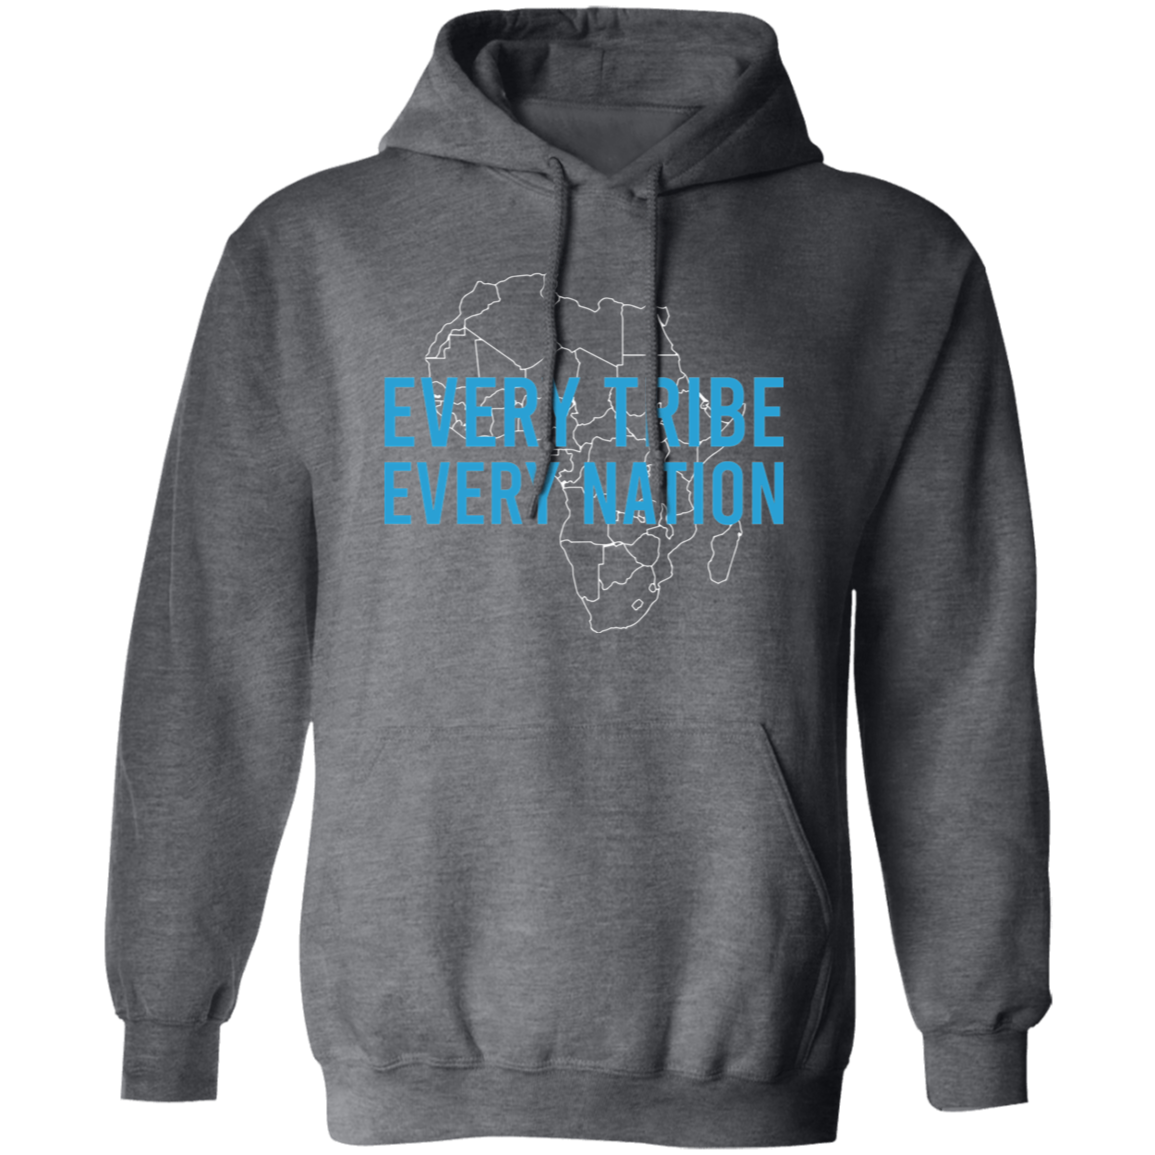 Every Tribe - Pullover Hoodie